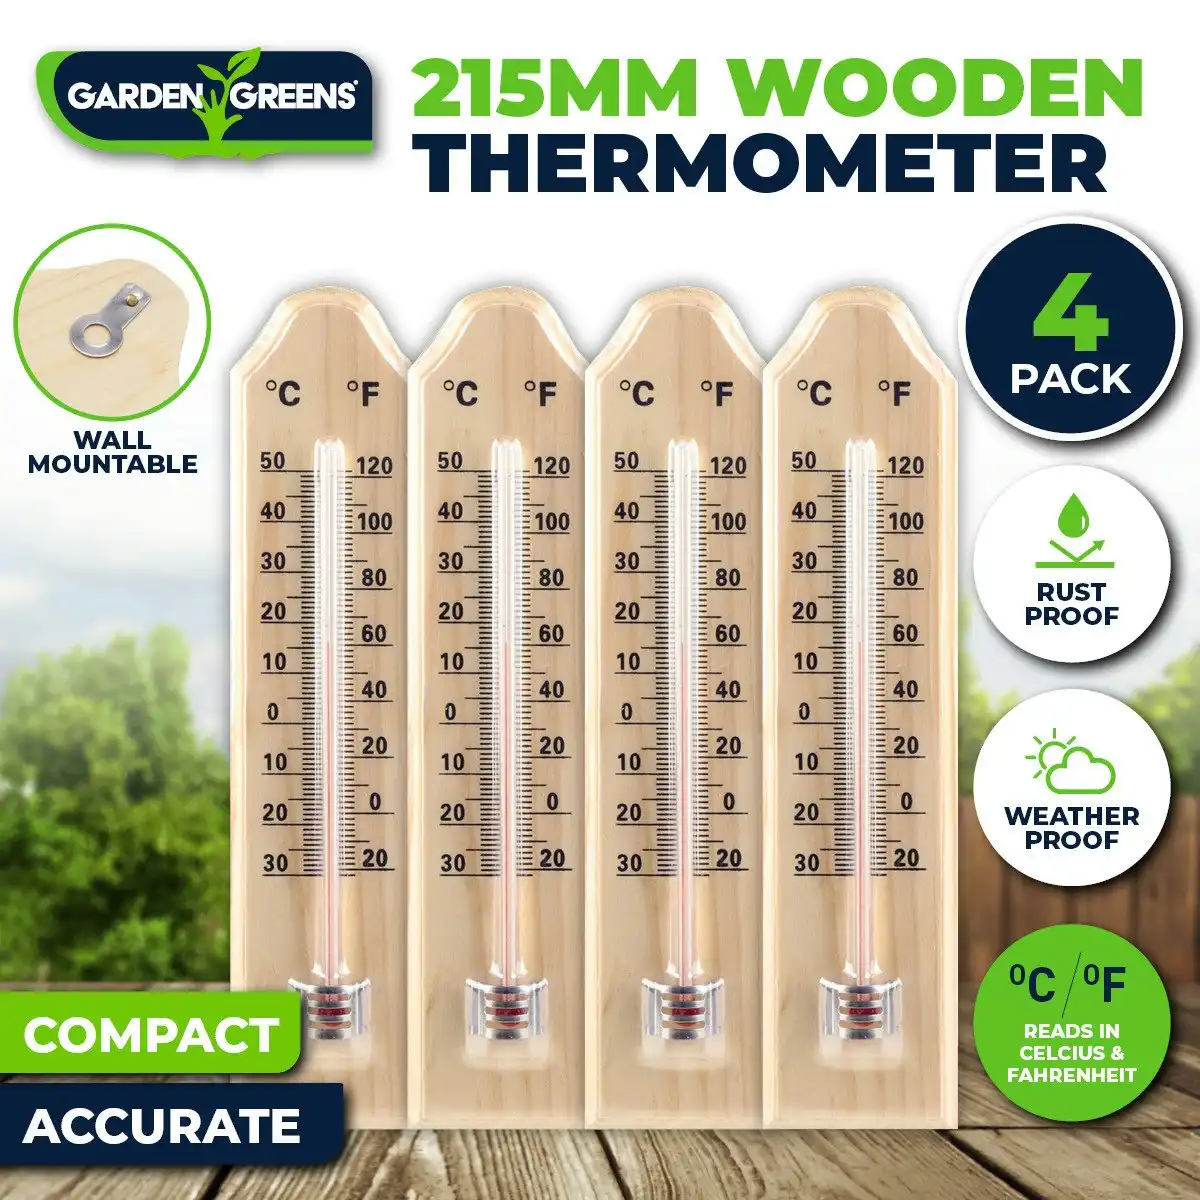 Garden Greens 4PK Thermometer Wooden Accurate Weatherproof 21.5 x 4.5cm